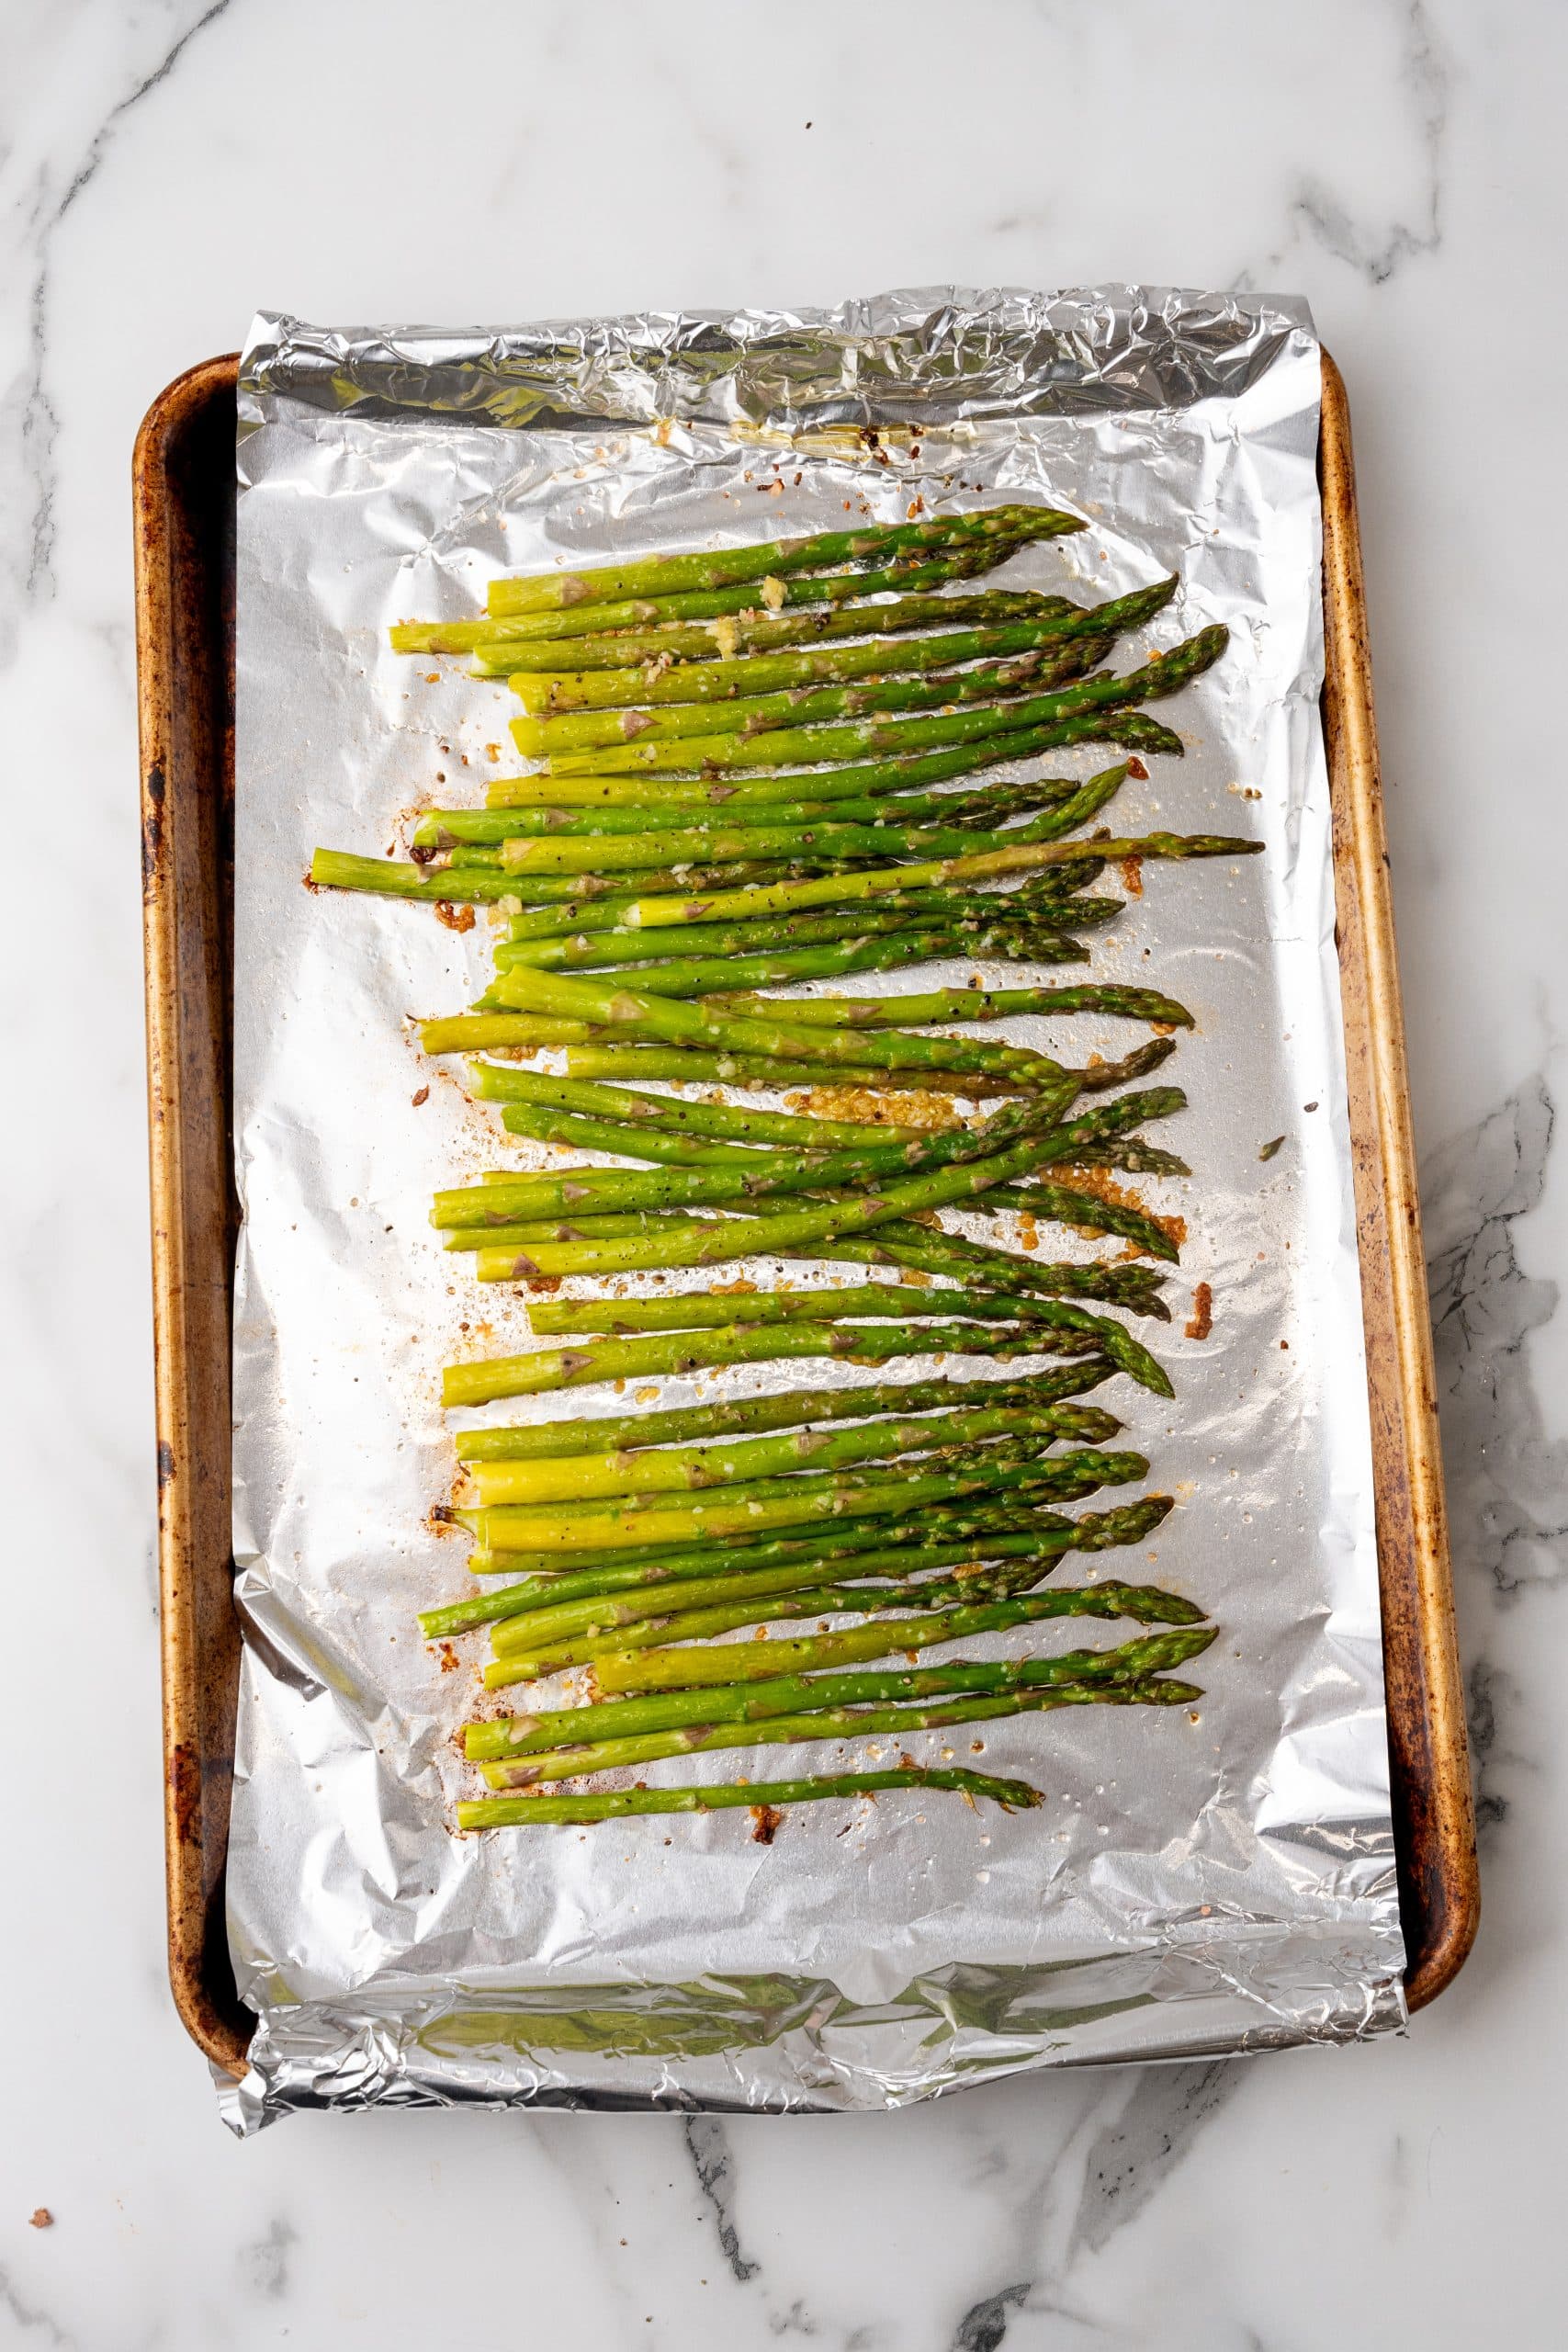 garlic roasted asparagus arranged in a single row on a foil lined baking sheet